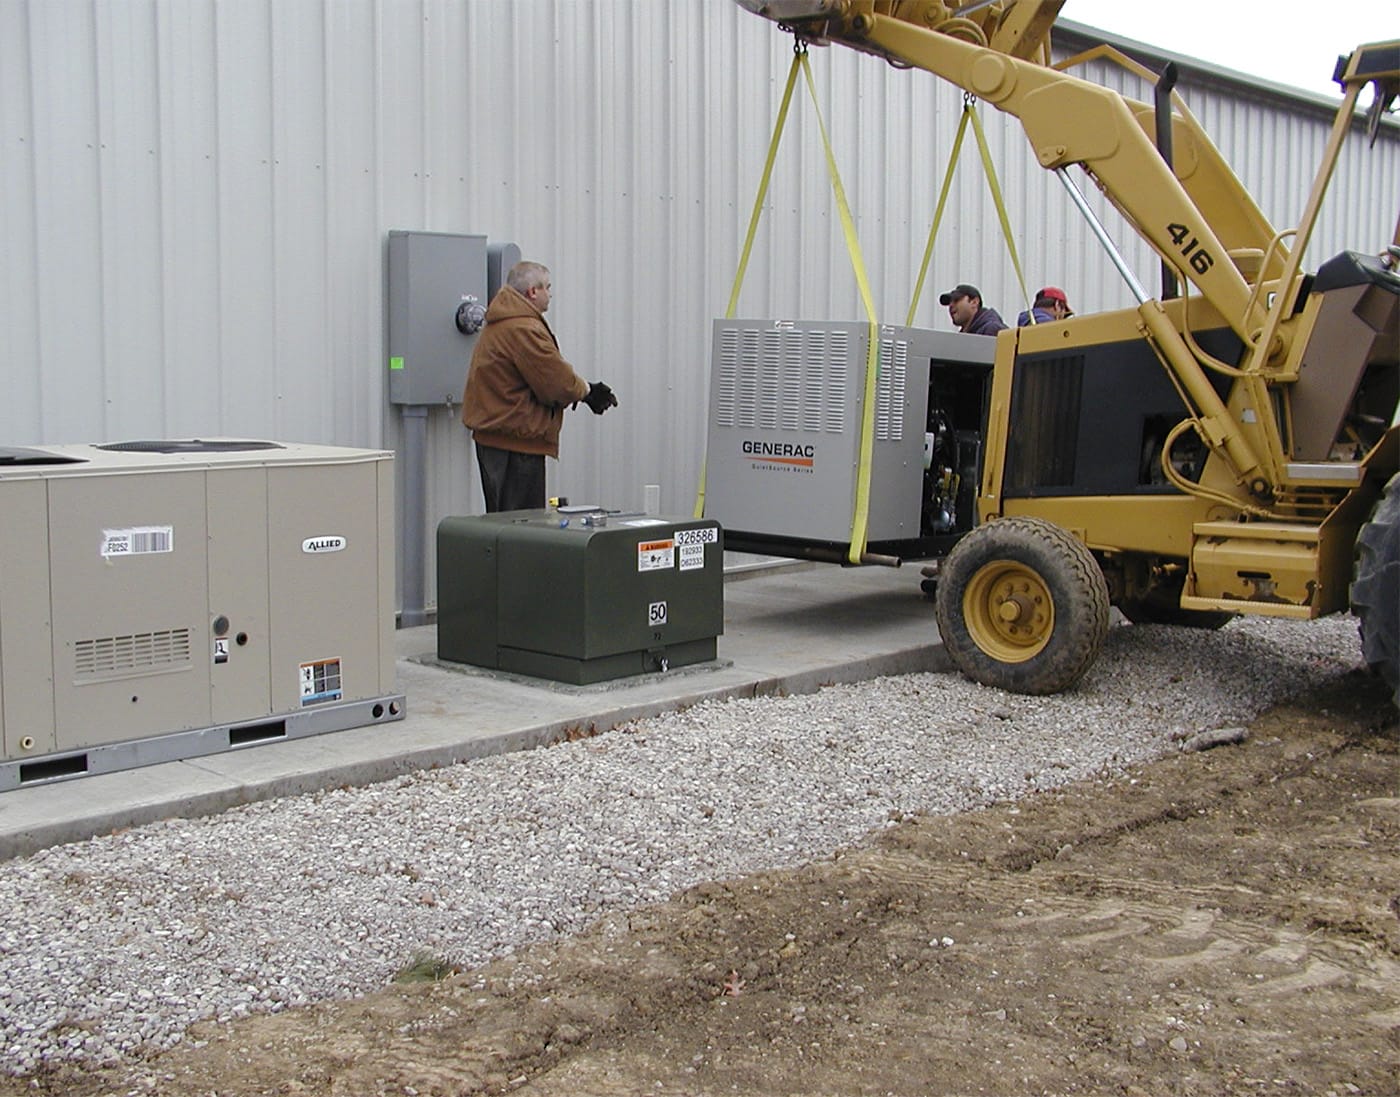 36 KW Generator stand by power